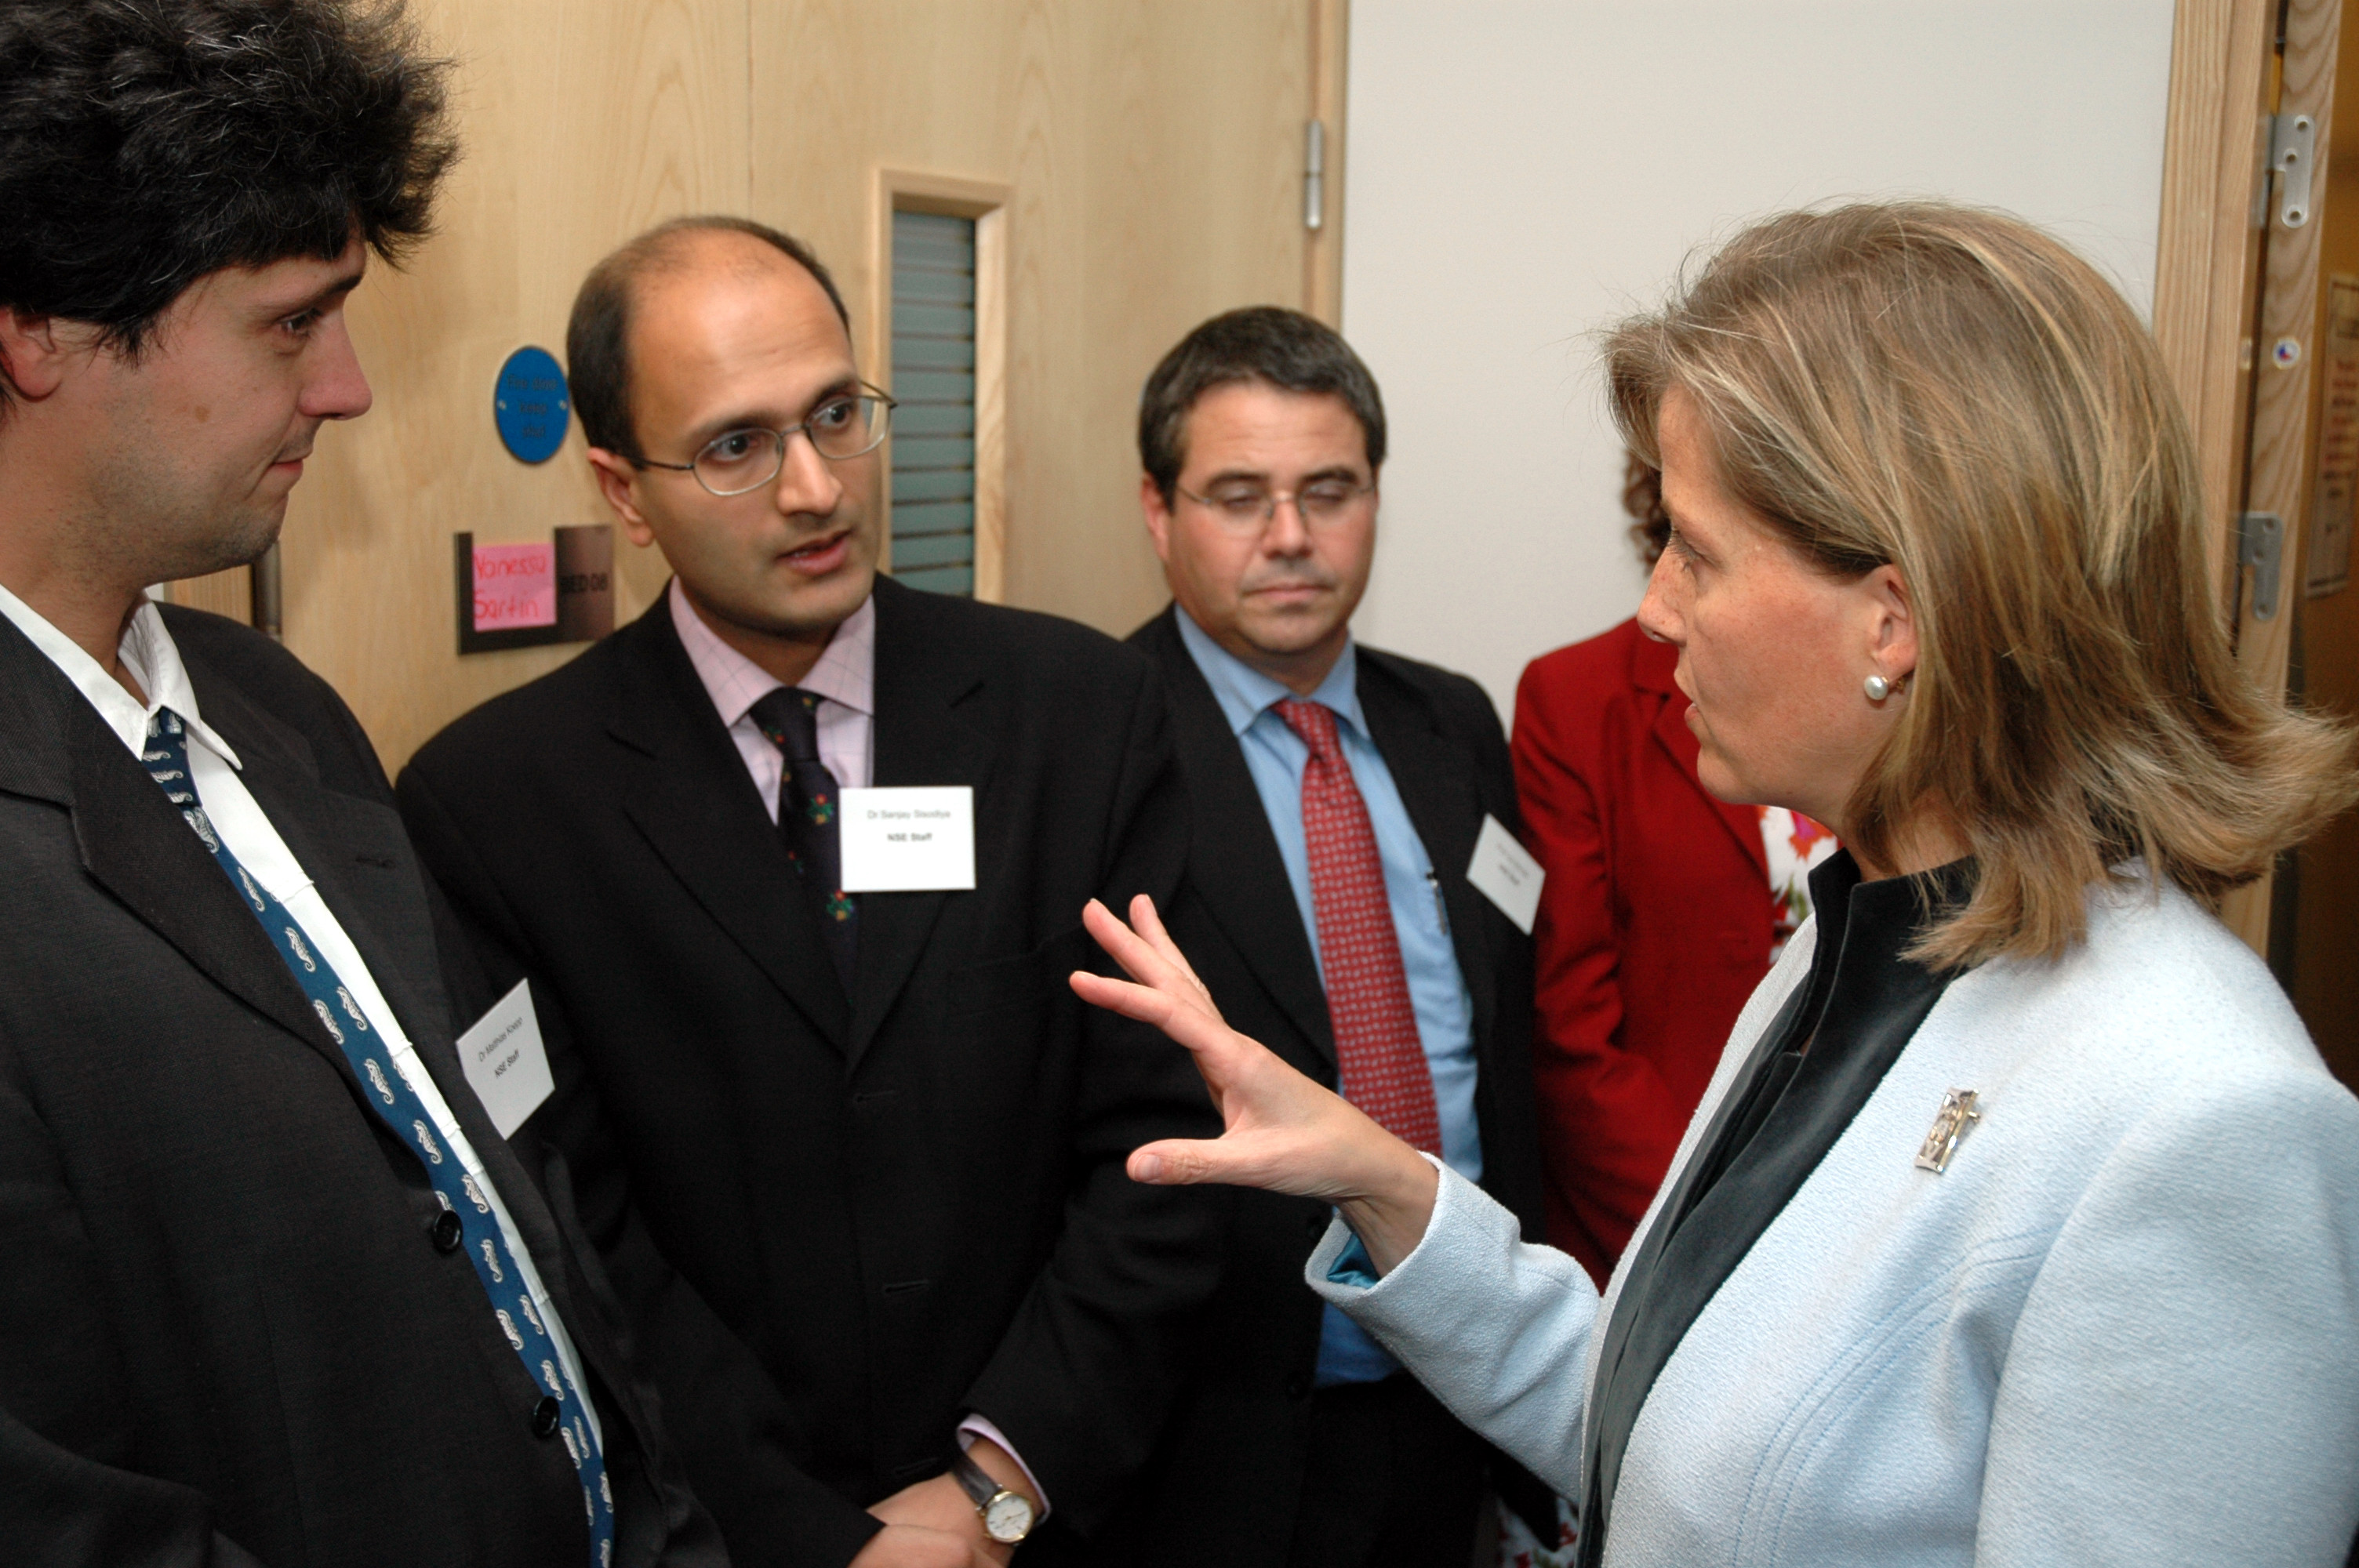 Countess of Wessex (now the Duchess of Edinburgh) meets, from left to right, Professor Matthias Koepp, Professor Sanjay Sisodiya and Professor Ley Sander , now Medical Diector at the Society